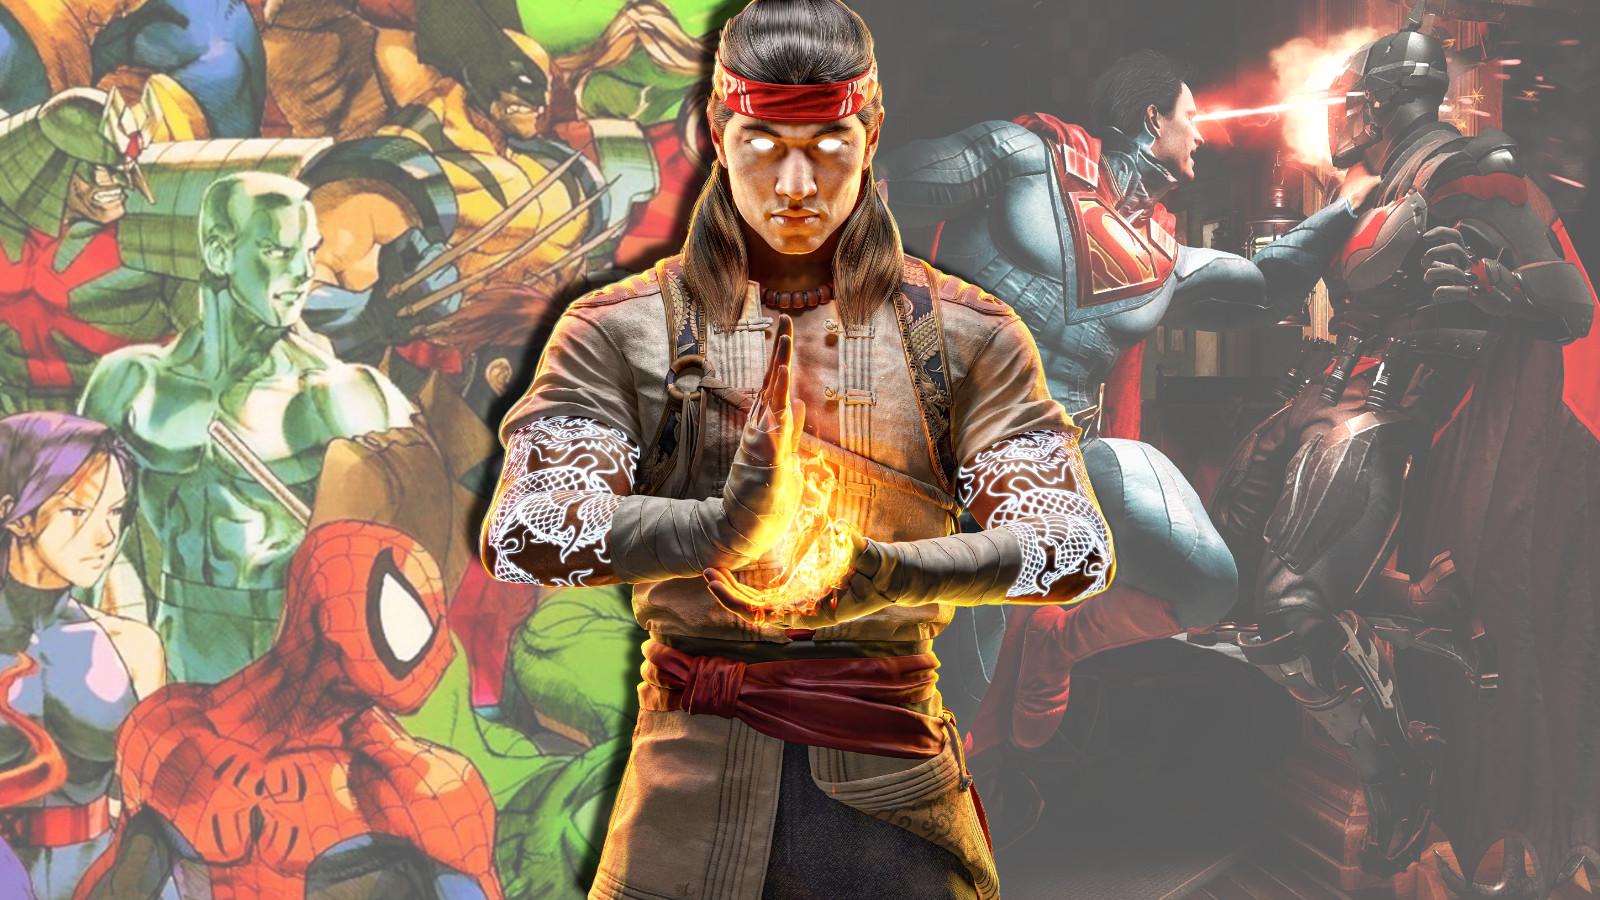 Fire God Liu Kang in front of art of Marvel vs. Capcom 2 and Injustice 2.